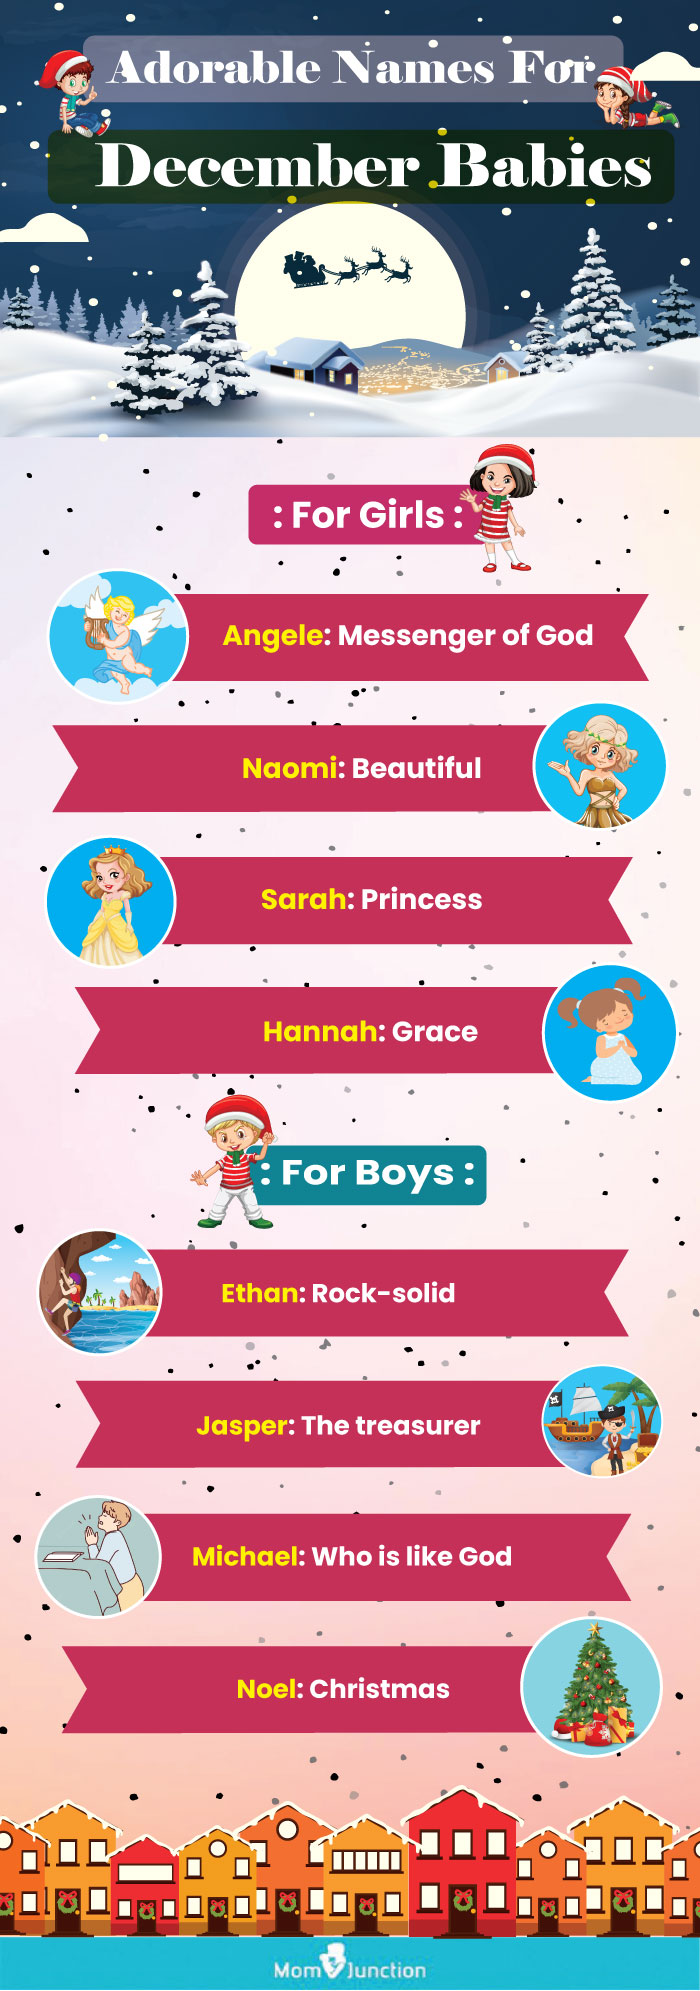 adorable names for december babies (infographic)